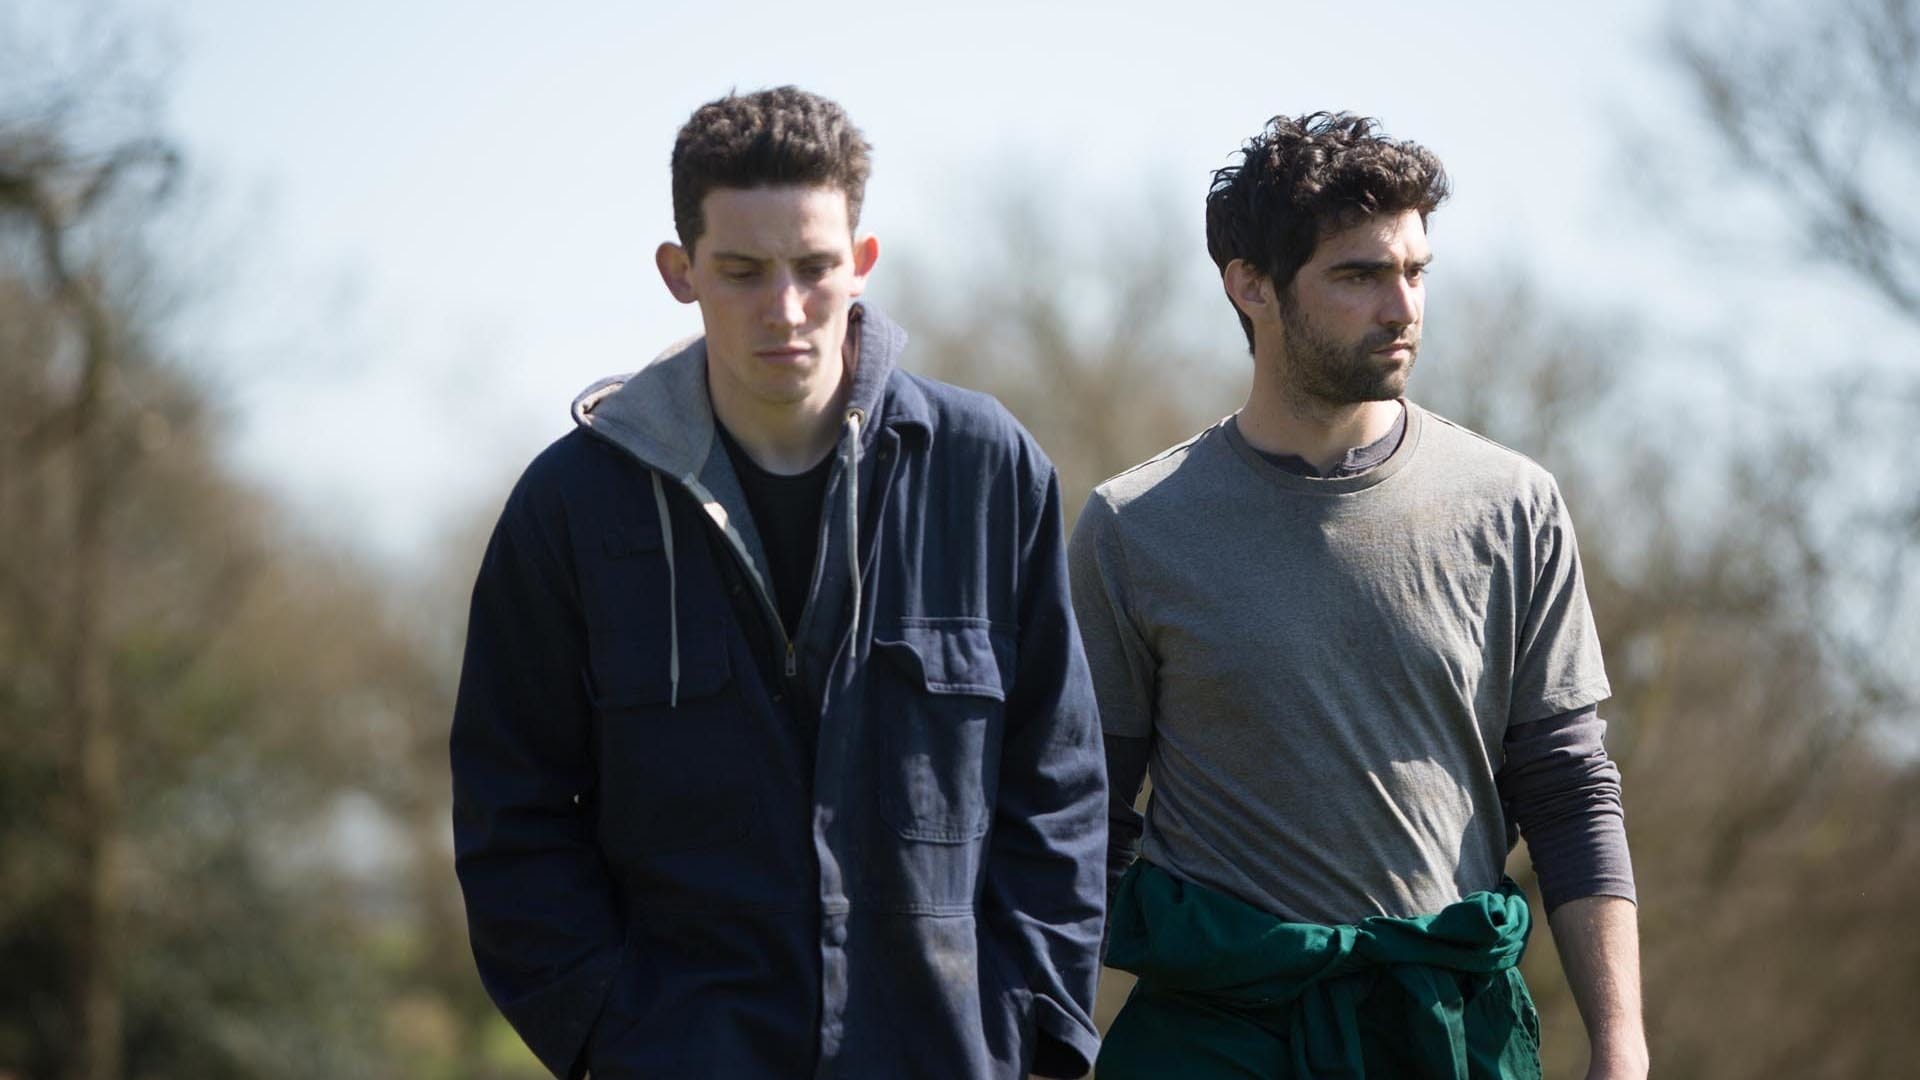 God’s Own Country 2017 123movies